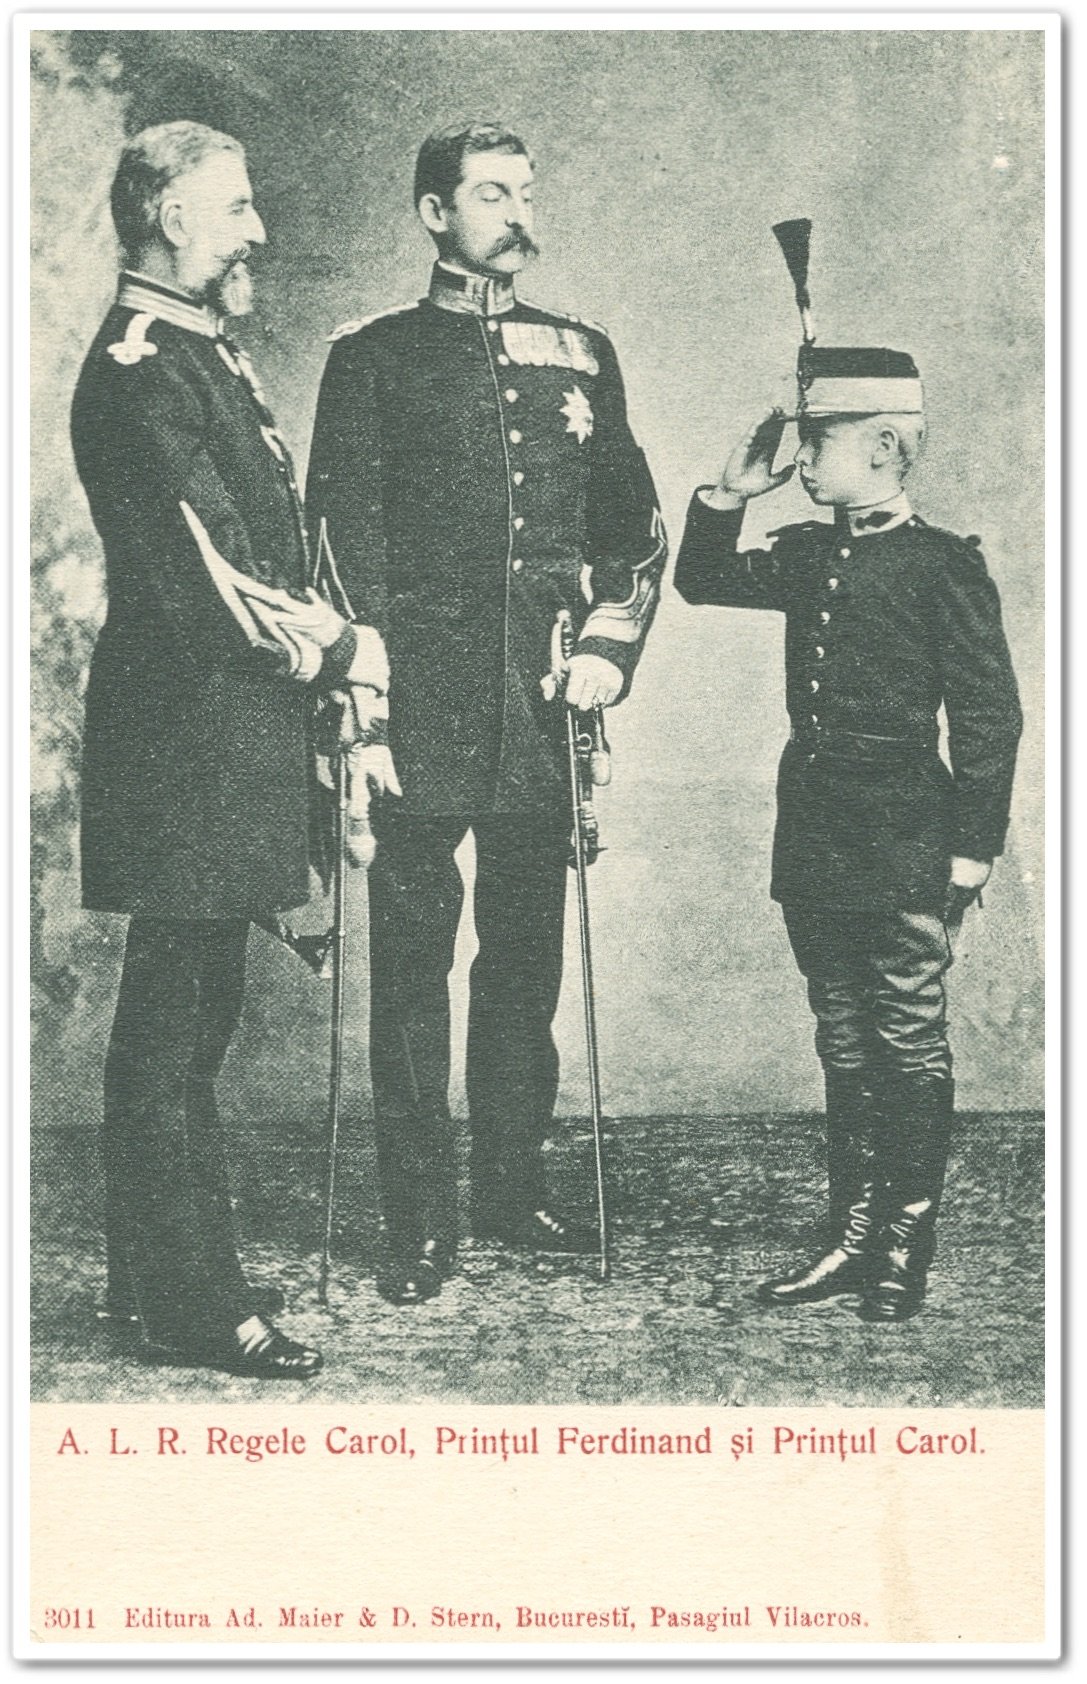 Three generations of romanian royalty: King Carol I, Prince Ferdinand (Carol I's nephew) and Prince Carol (son of Ferdinand, future King Carol IIndof Romania) (National Archives of Romania, Bucharest, collection Photographical Documents_II of the National Archives 29).